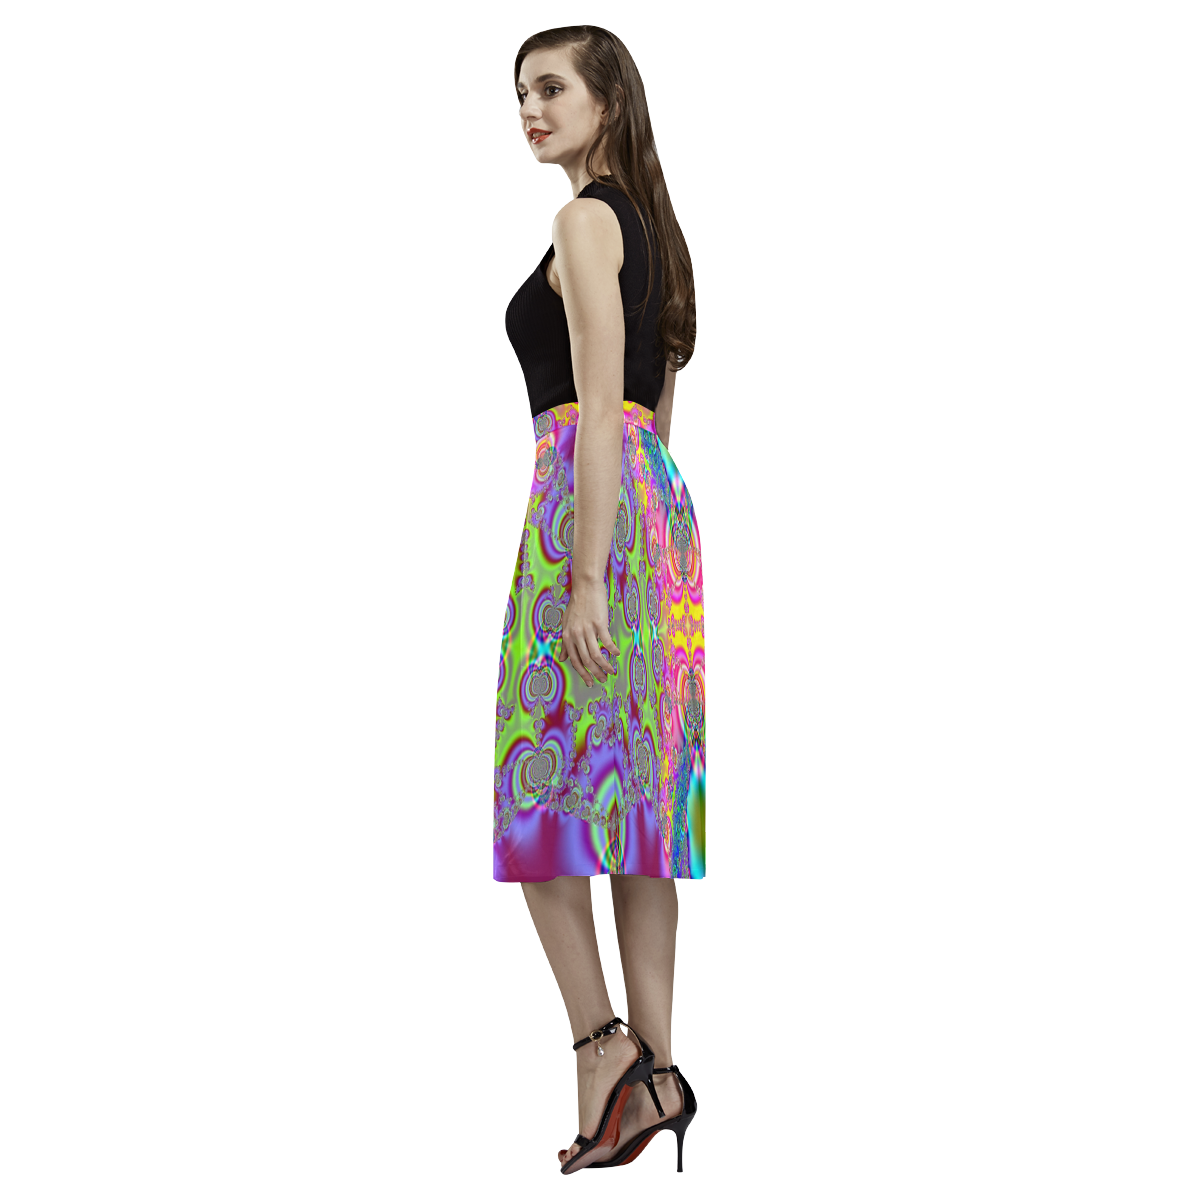 Bohemian Lace Tie-Dye Fractal Abstract Aoede Crepe Skirt (Model D16)